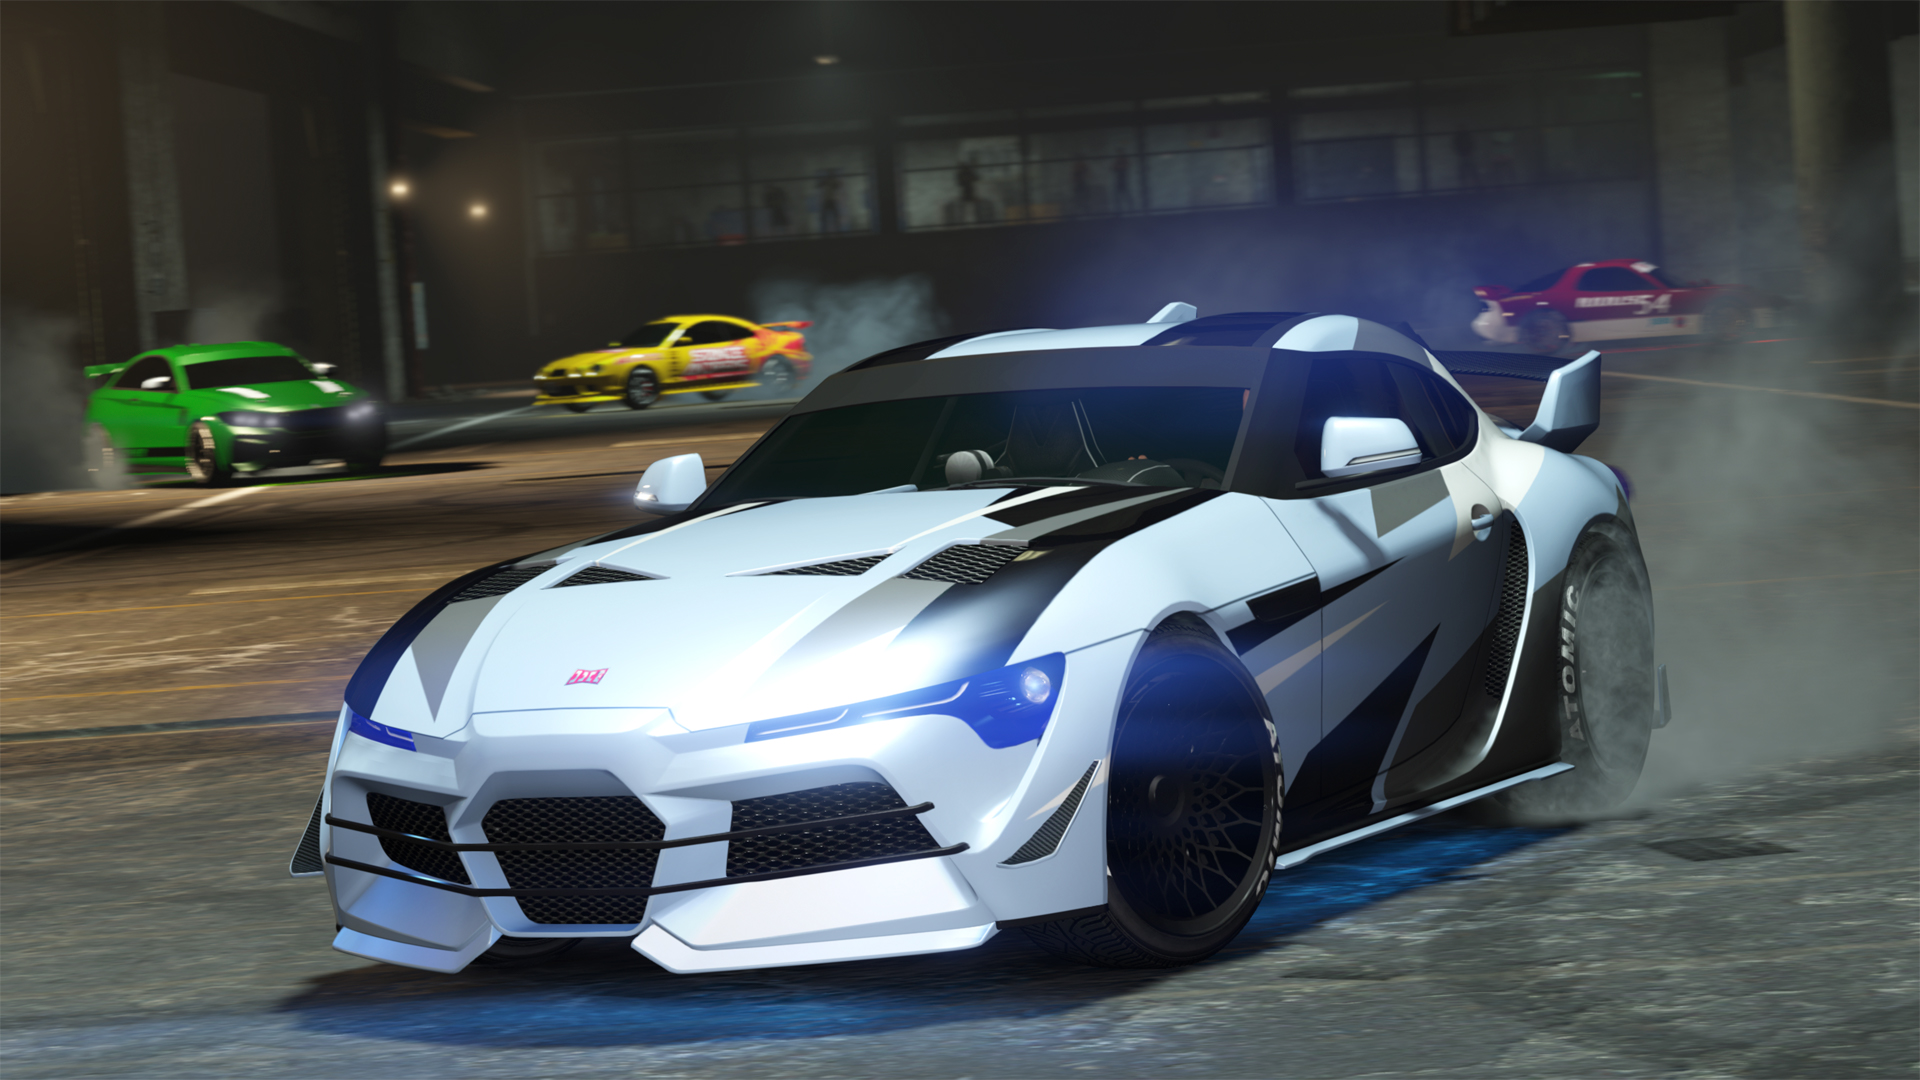 GTA Online: Best Custom Games That Players Need To Try